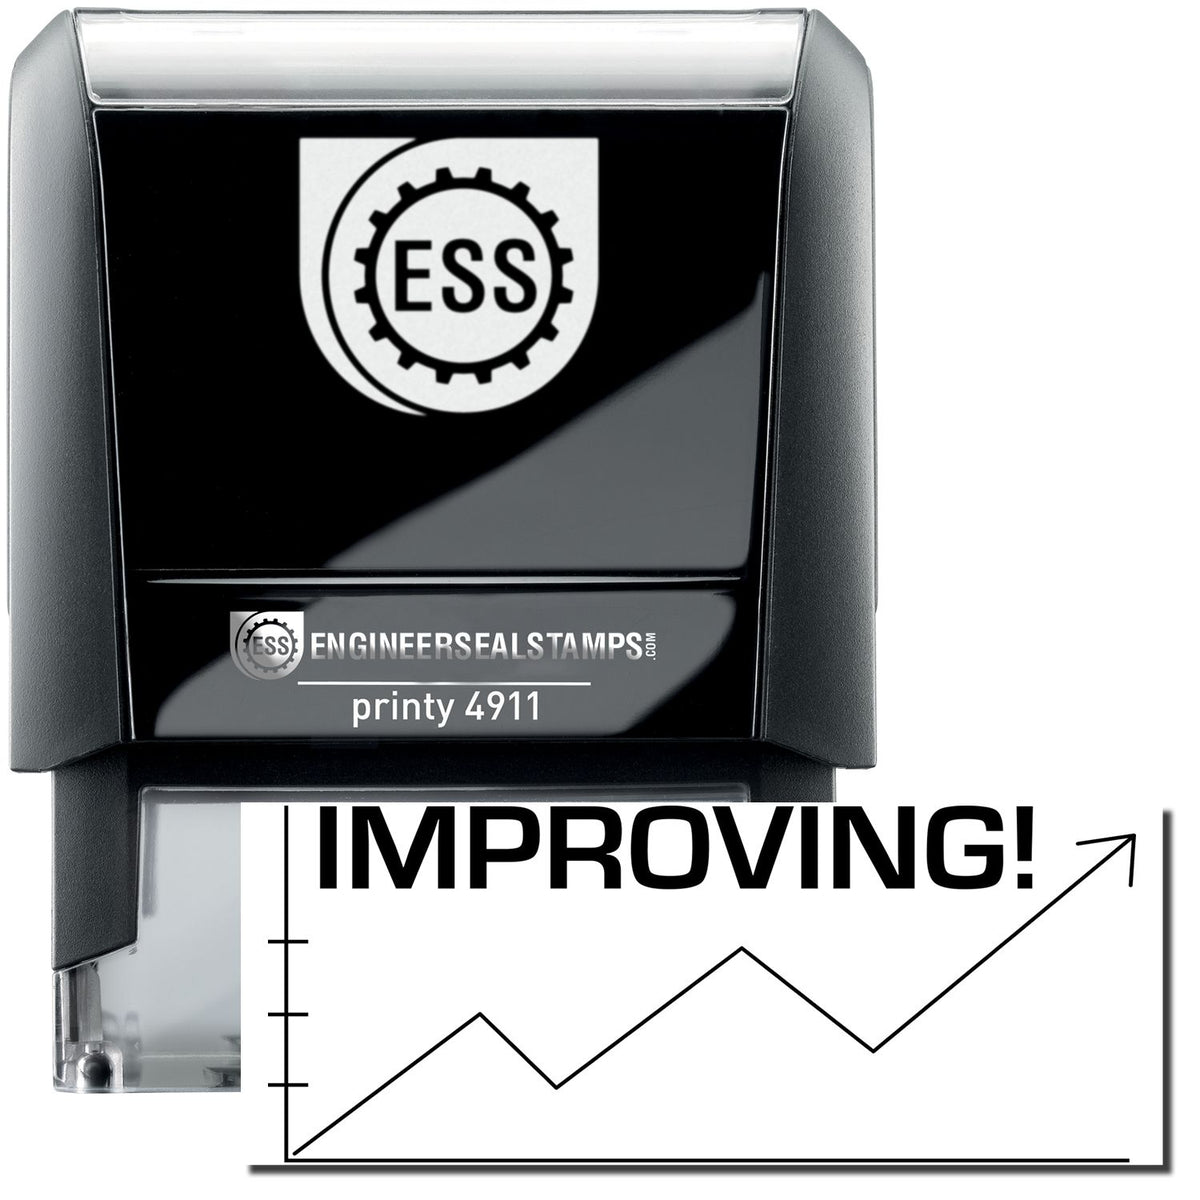 A self-inking stamp with a stamped image showing how the text &quot;IMPROVING&quot; (with an image of a chart below that shows an arrow moving up, down, and back up again) is displayed after stamping.